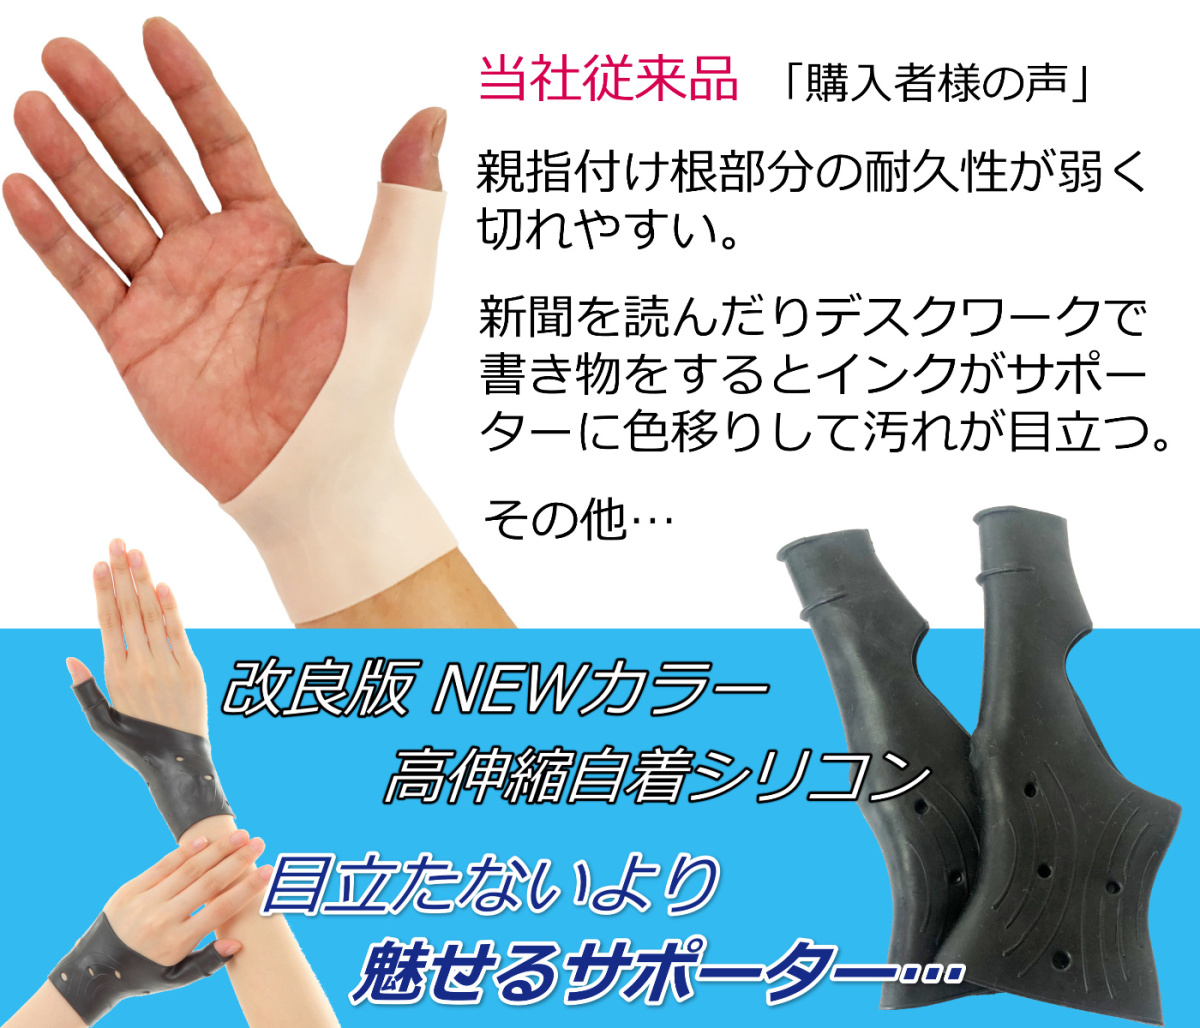 LUSAS wrist / parent finger supporter 2 sheets entering black wrist supporter parent finger supporter . scabbard . taping . finger CM.... silicon material wrist protection water work man and woman use 